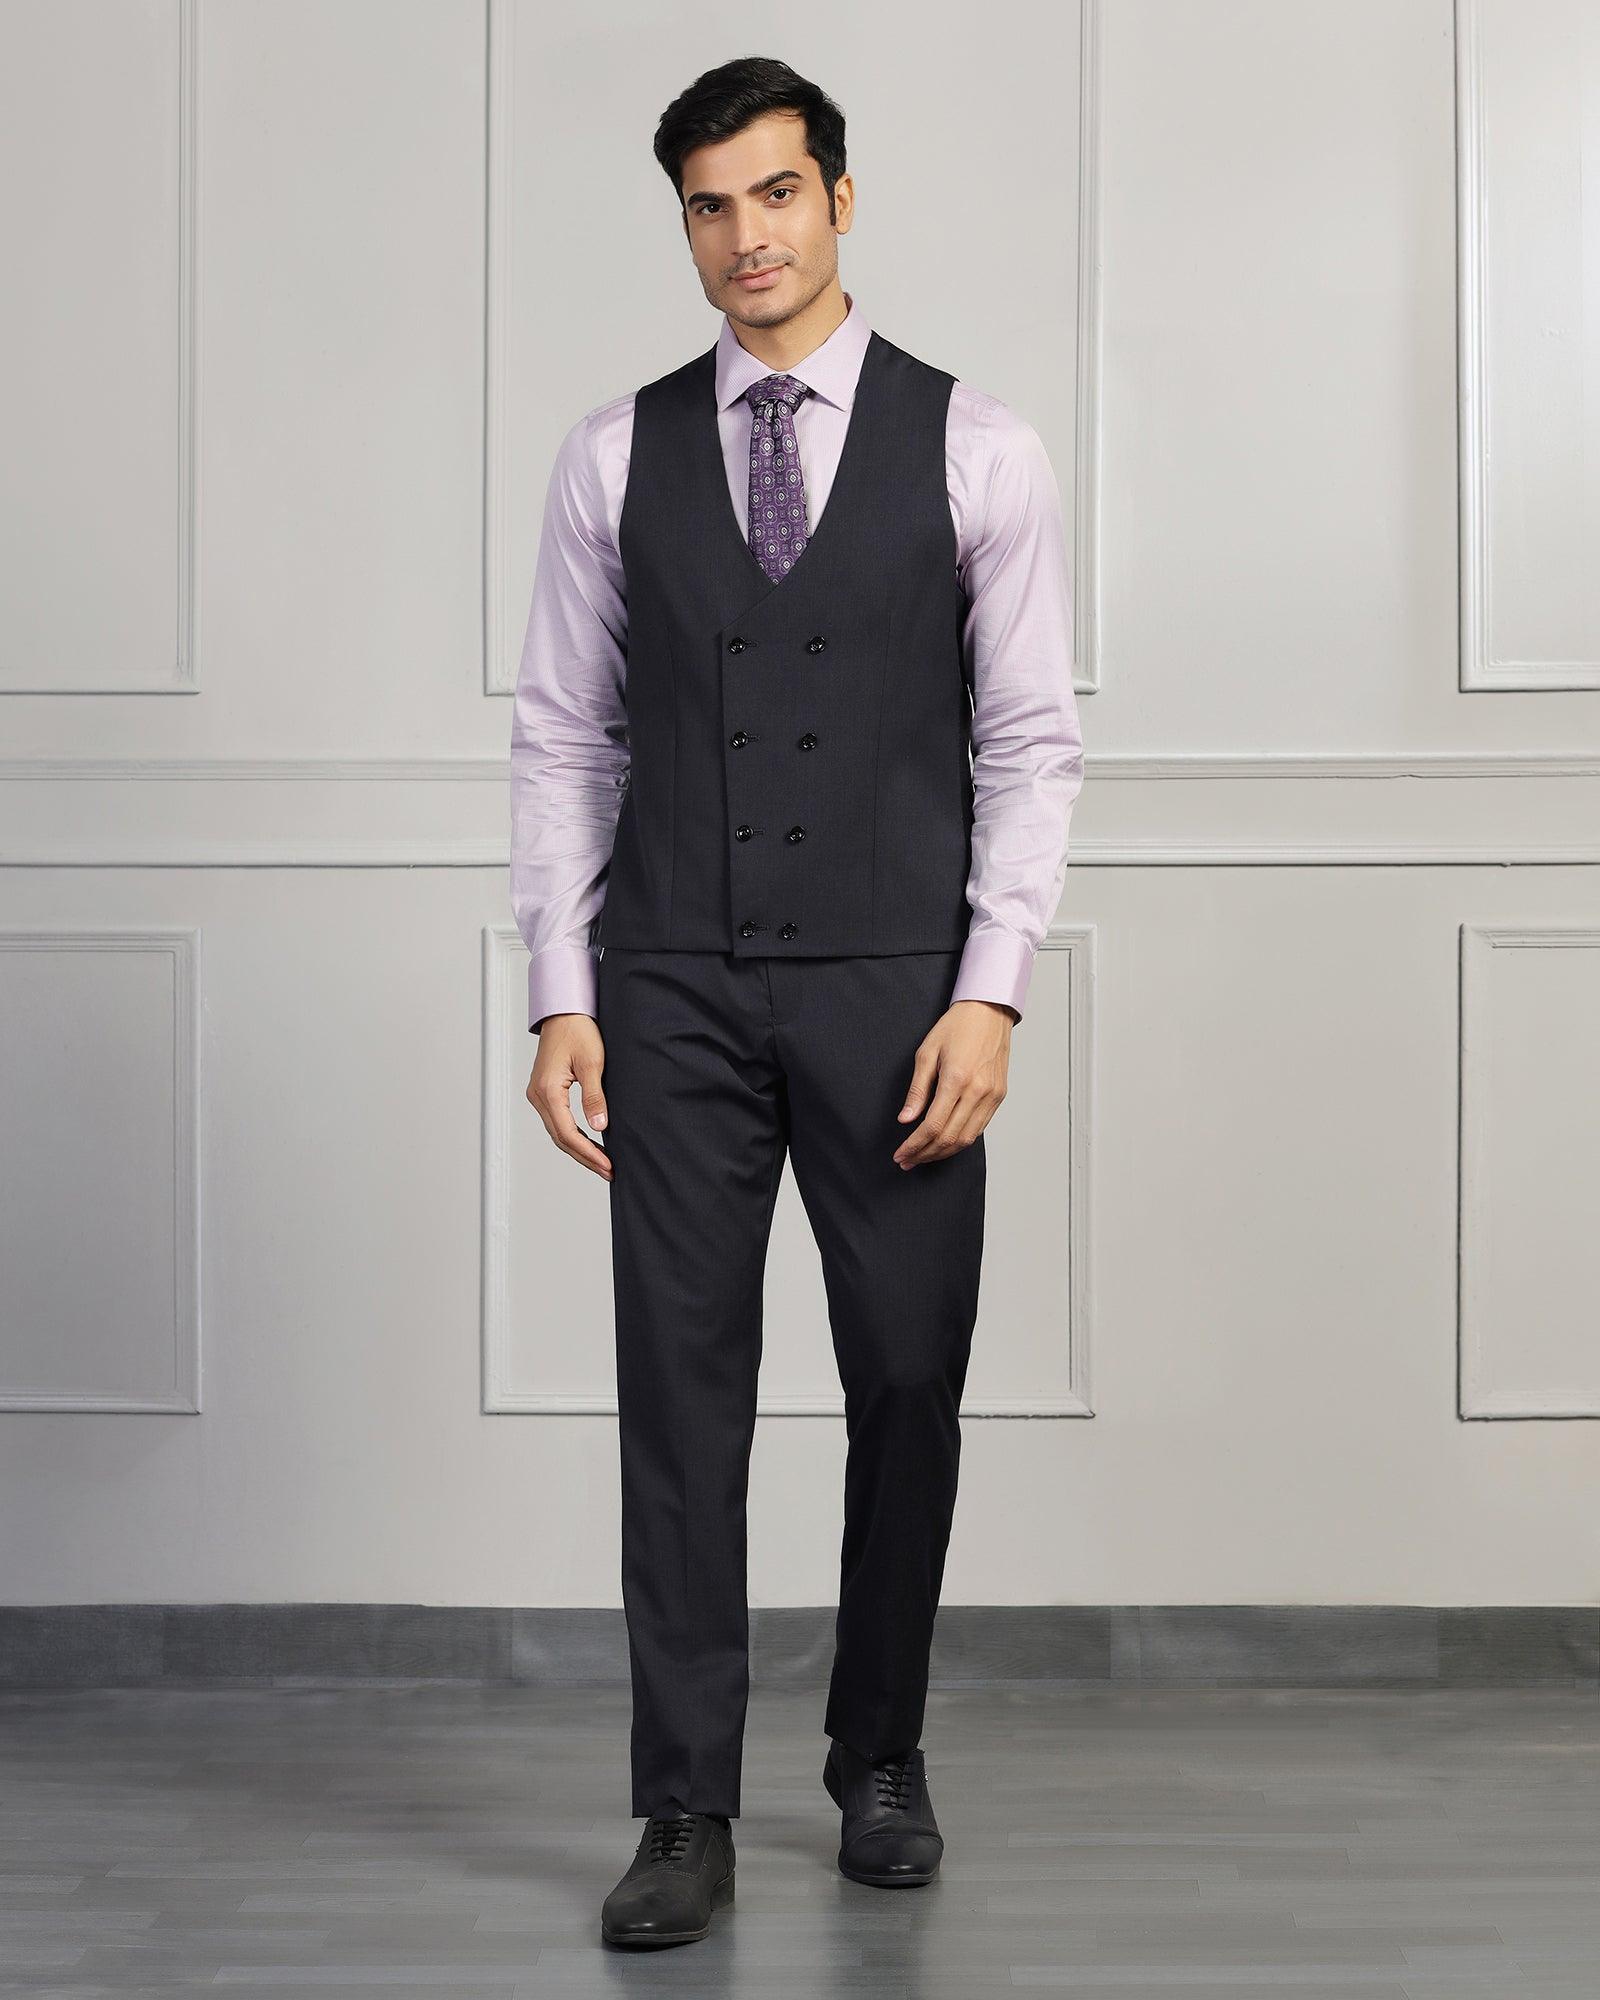 Three Piece Charcoal Solid Formal Suit - Keno